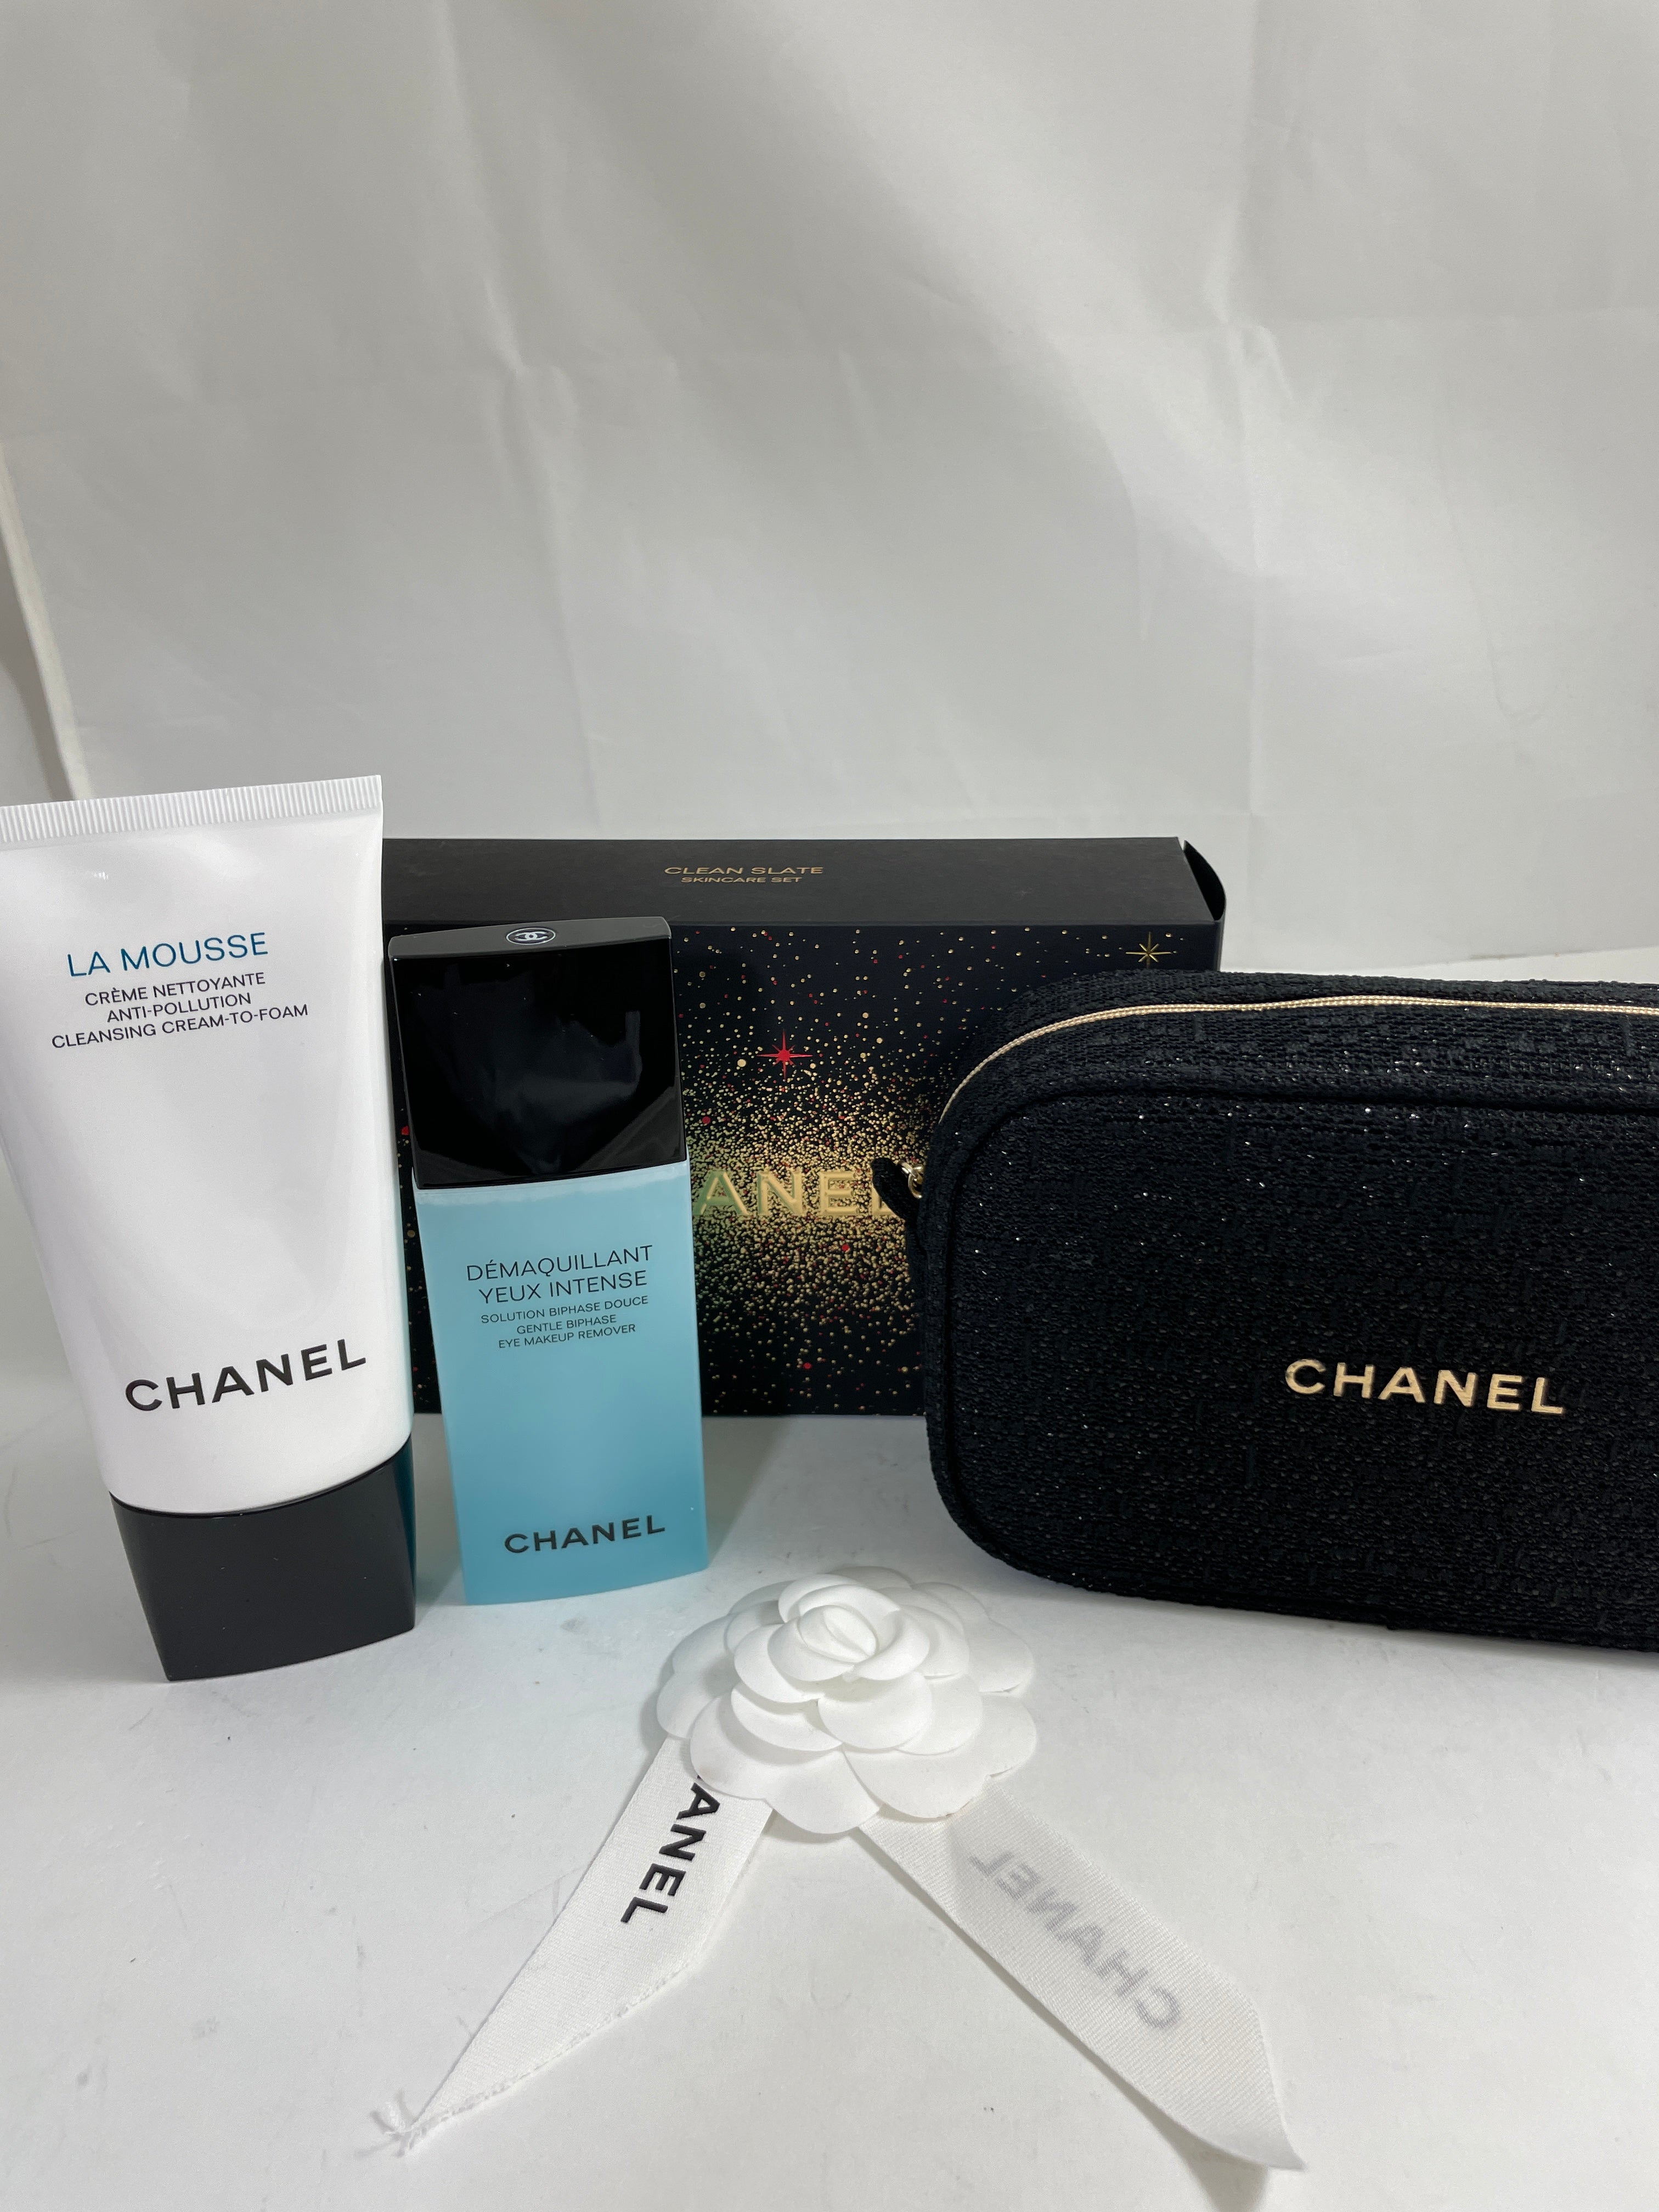 Chanel Is Releasing A Makeup Line Made Especially For Men